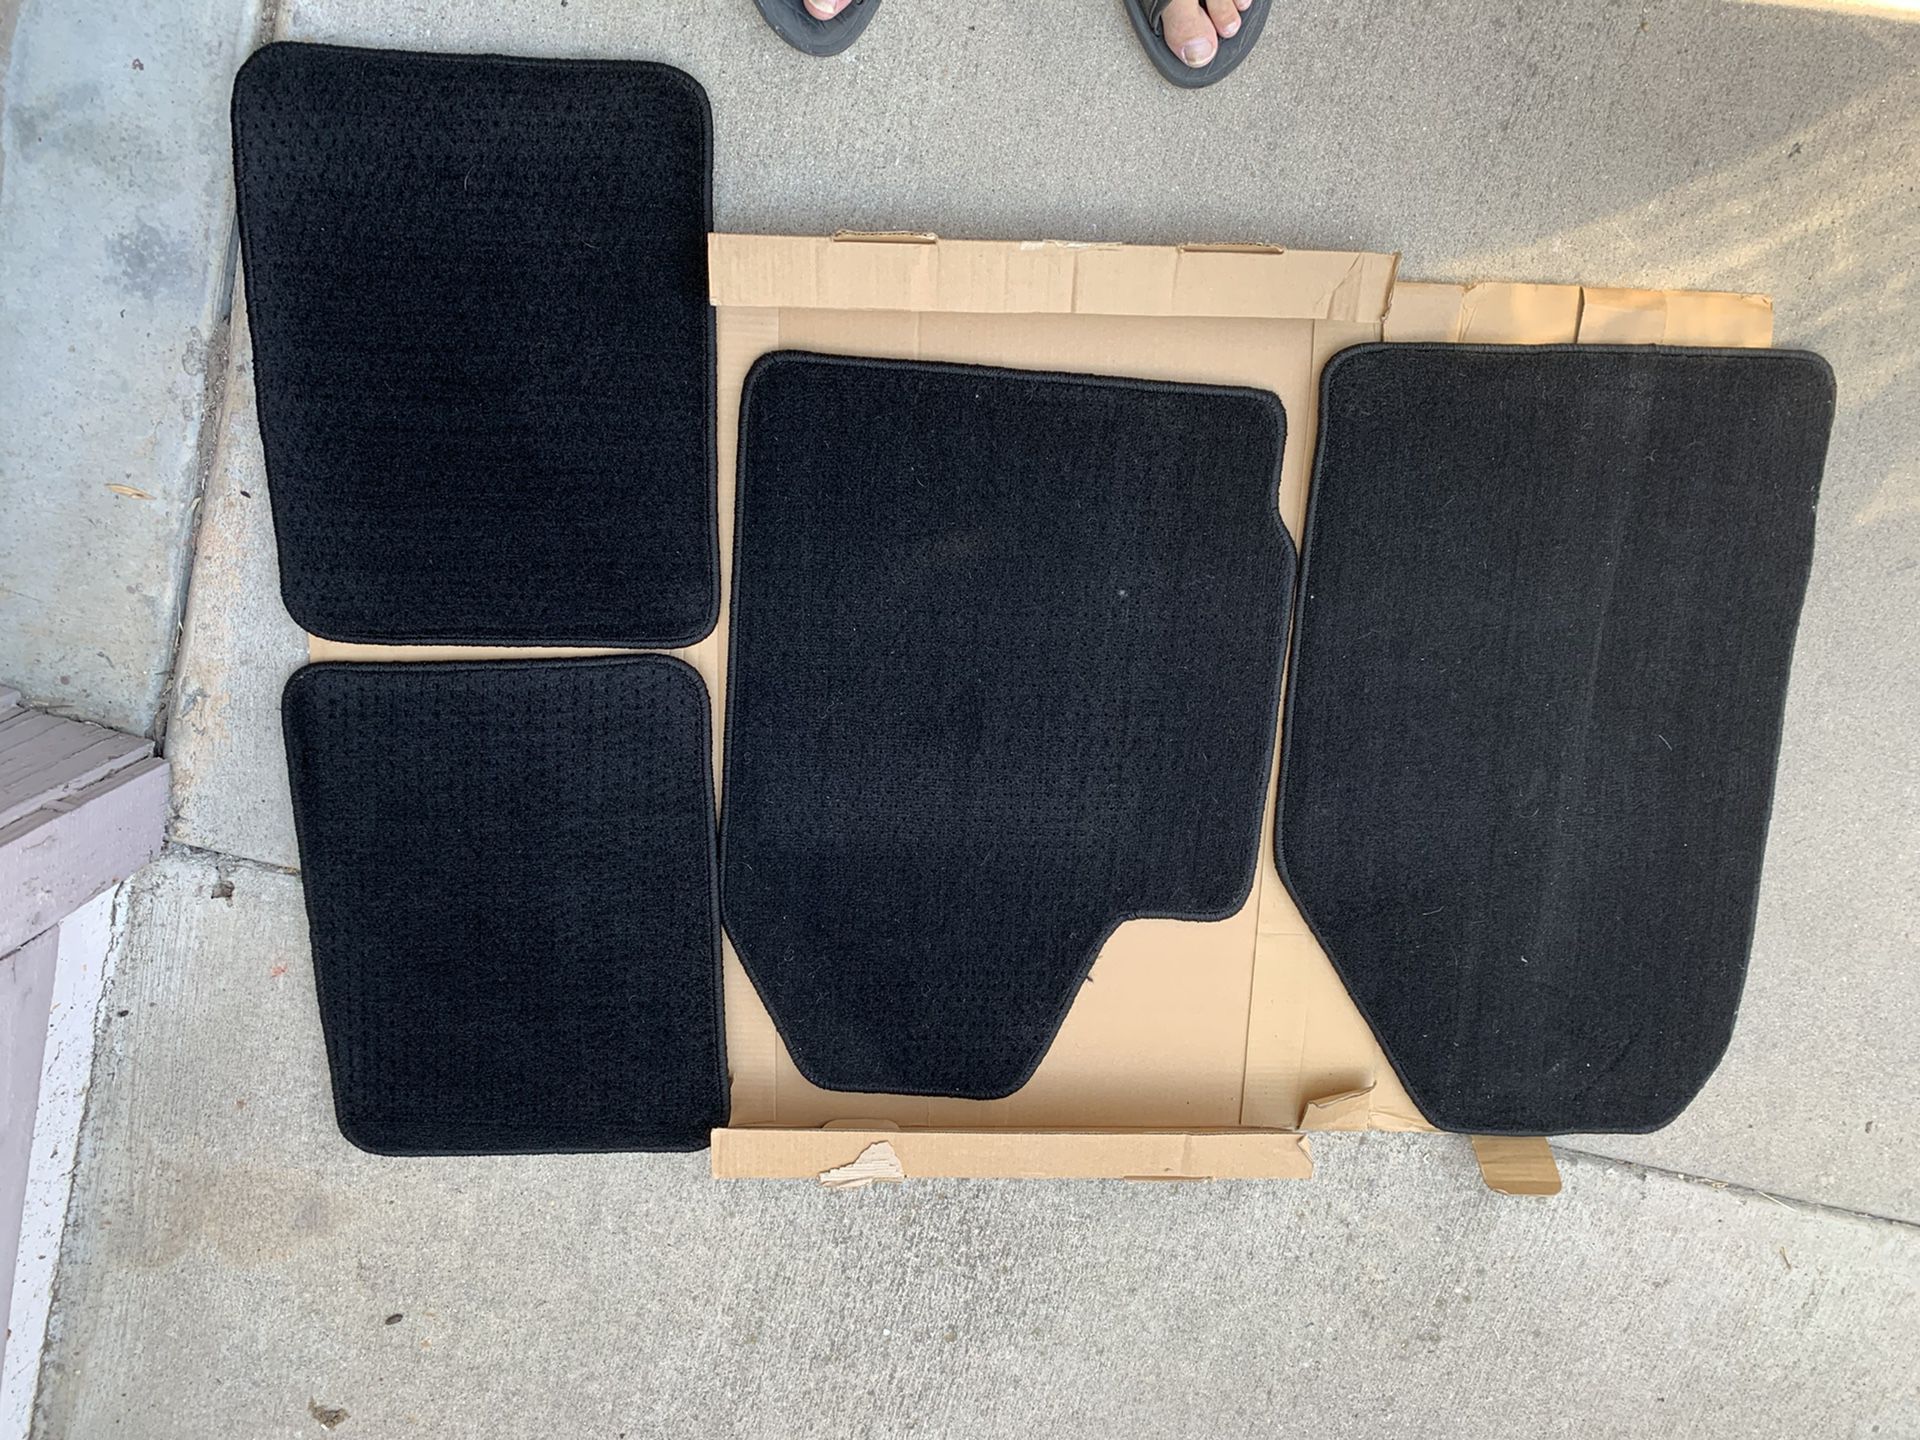 LOYDS FLOORMATS BRAND NEW!!! FIRST $25 TAKES IT